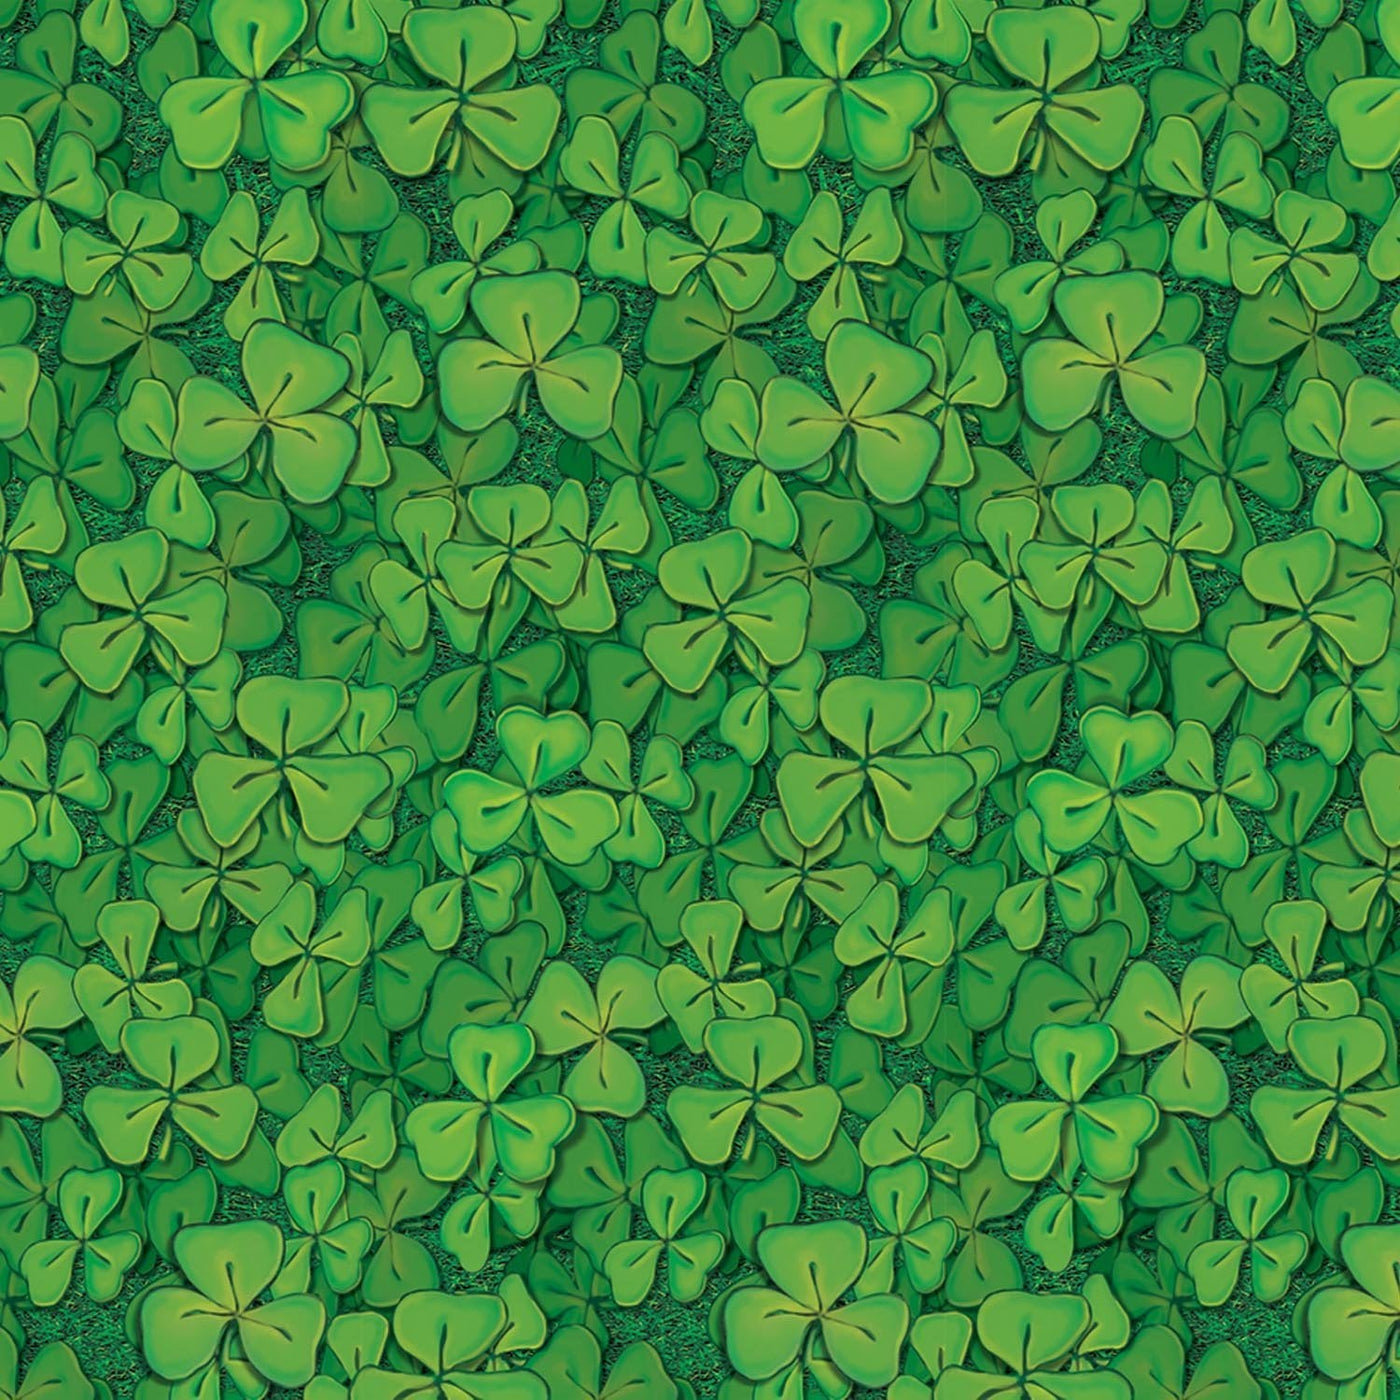 Clover Field Backdrop 4ft x 30in - JJ's Party House